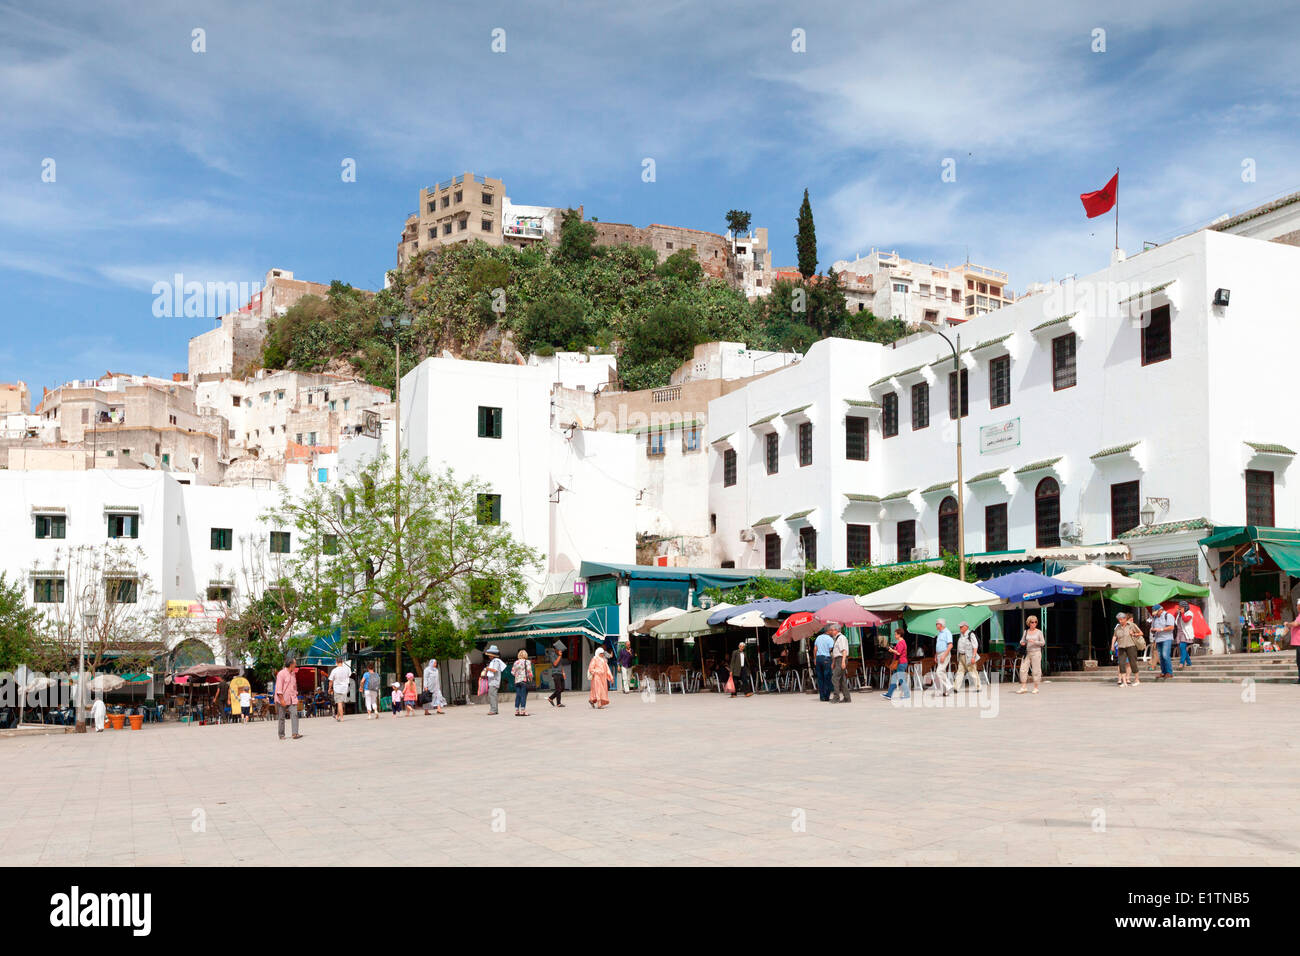 View of the local cafes and restaurants in the main square at the hilltop town of Moulay Idriss near  Meknes in  Morocco. Stock Photo